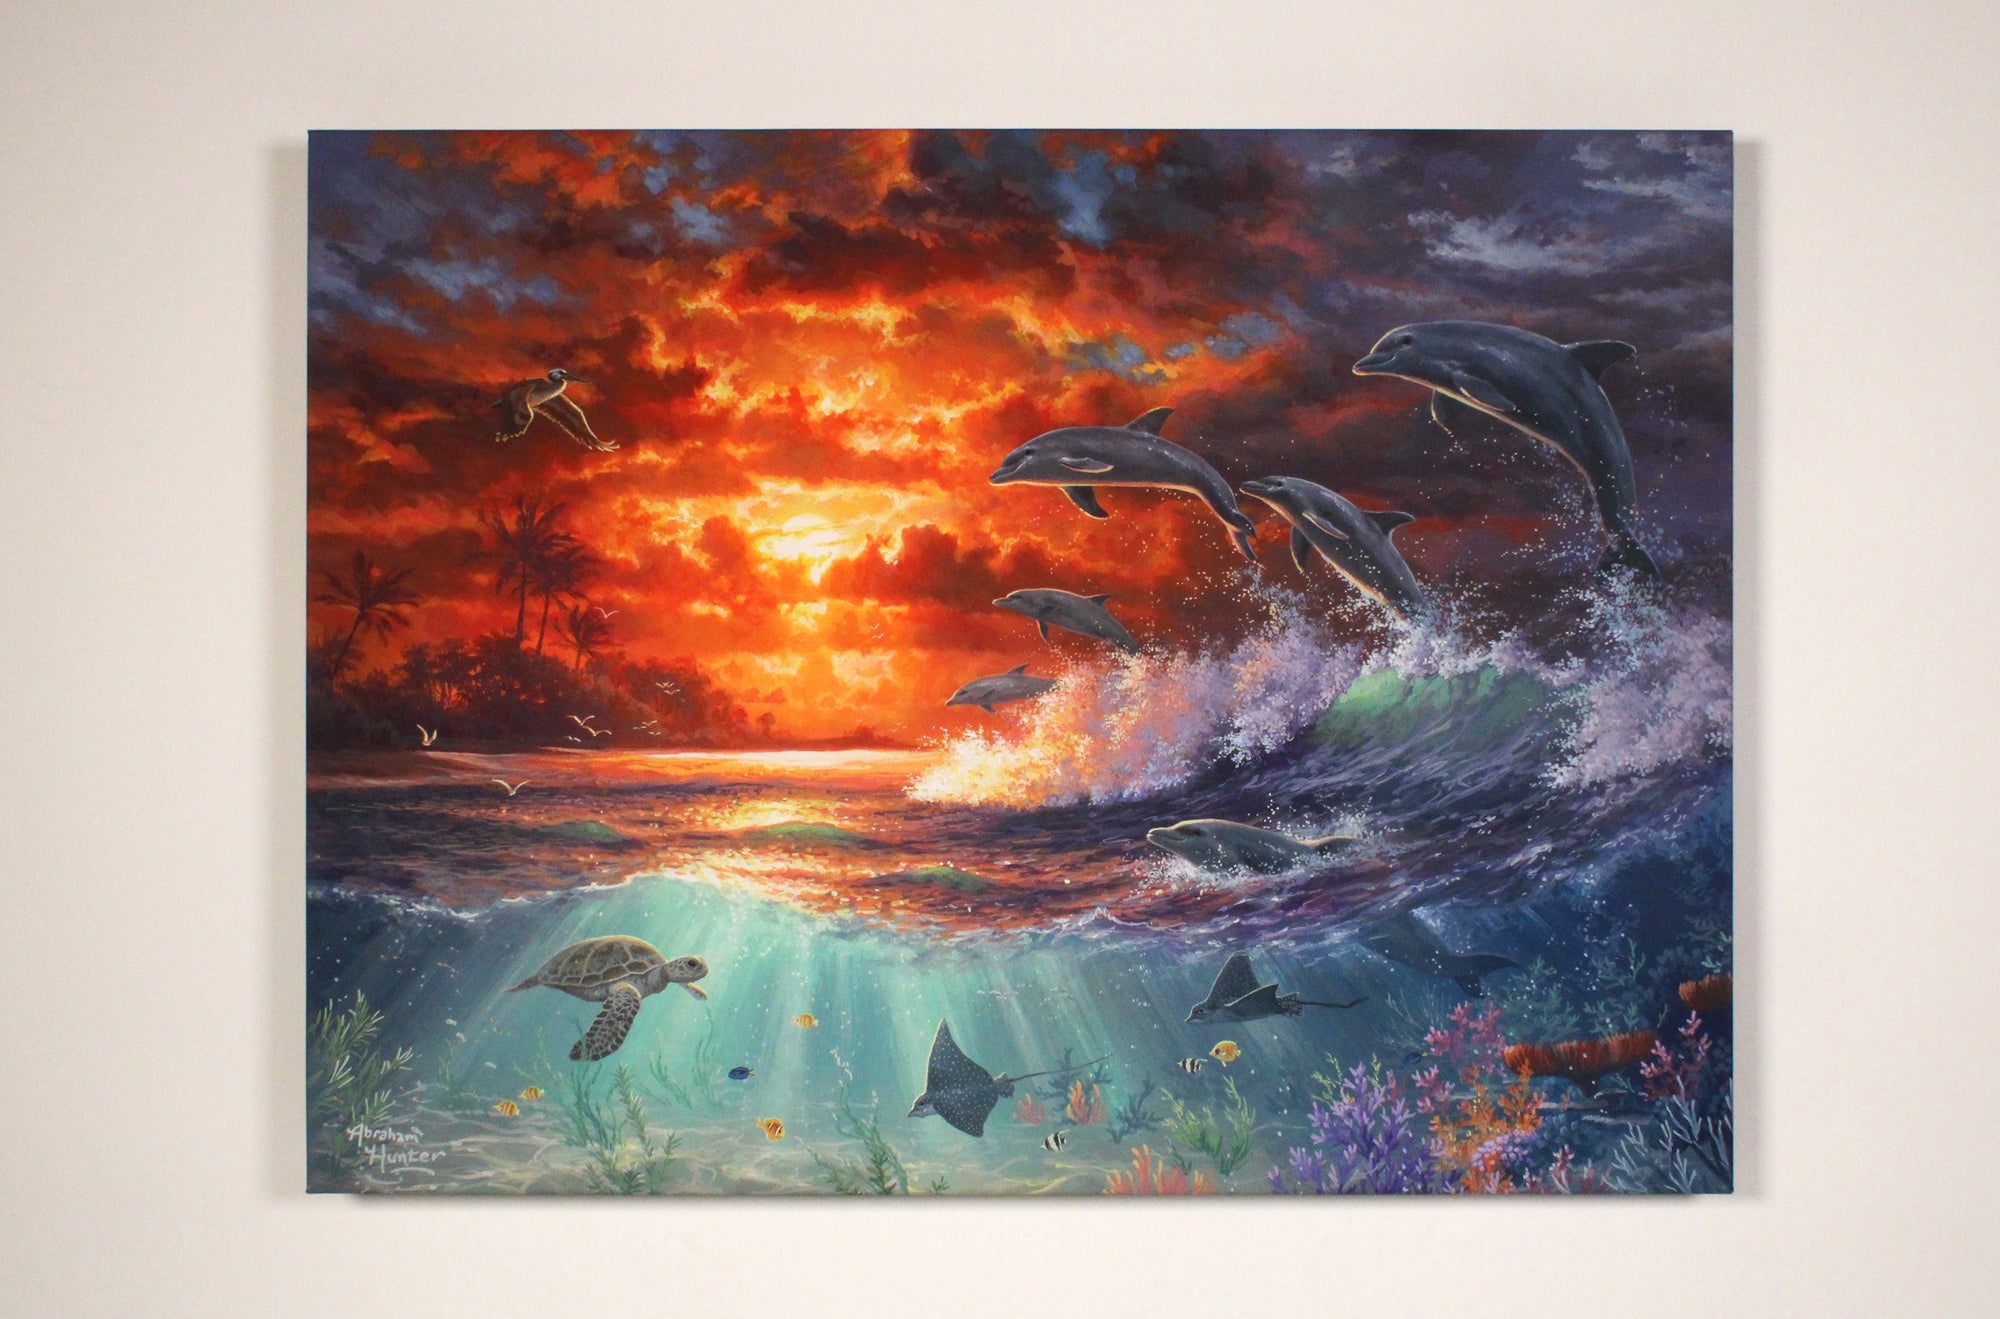 Beyond the Shore 18x24 Fully Illuminated LED Art. Dolphins jumping out of ocean with other sea life beautifully photographed.